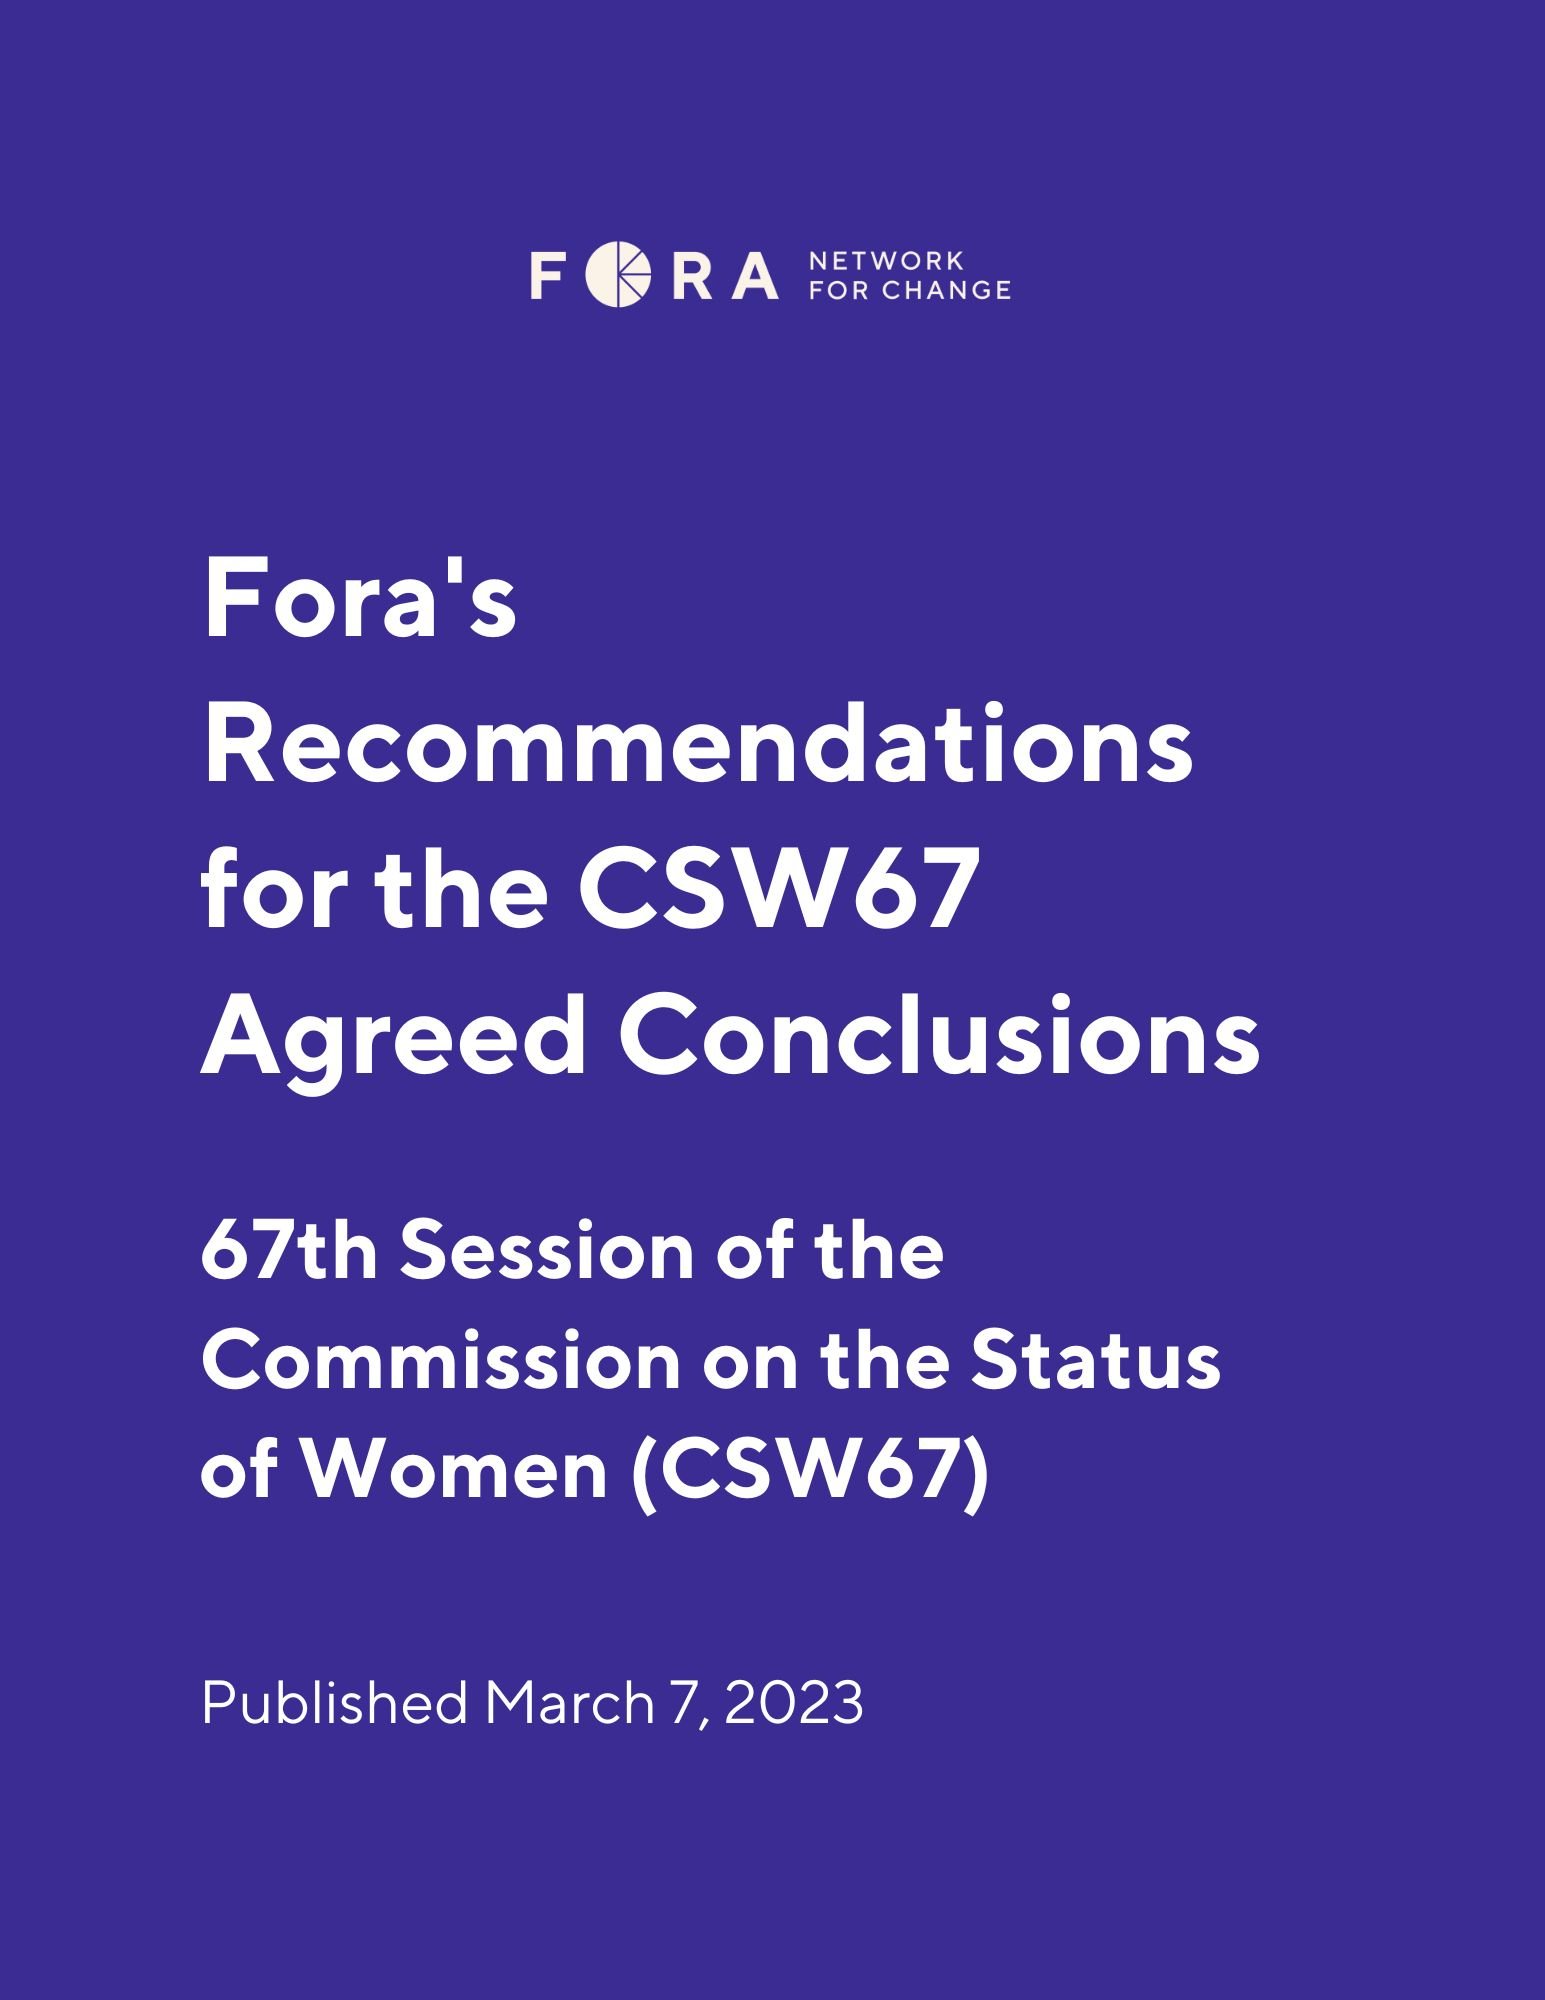 Fora's Recommendations for the CSW67 Agreed Conclusions 2023 (1).jpg